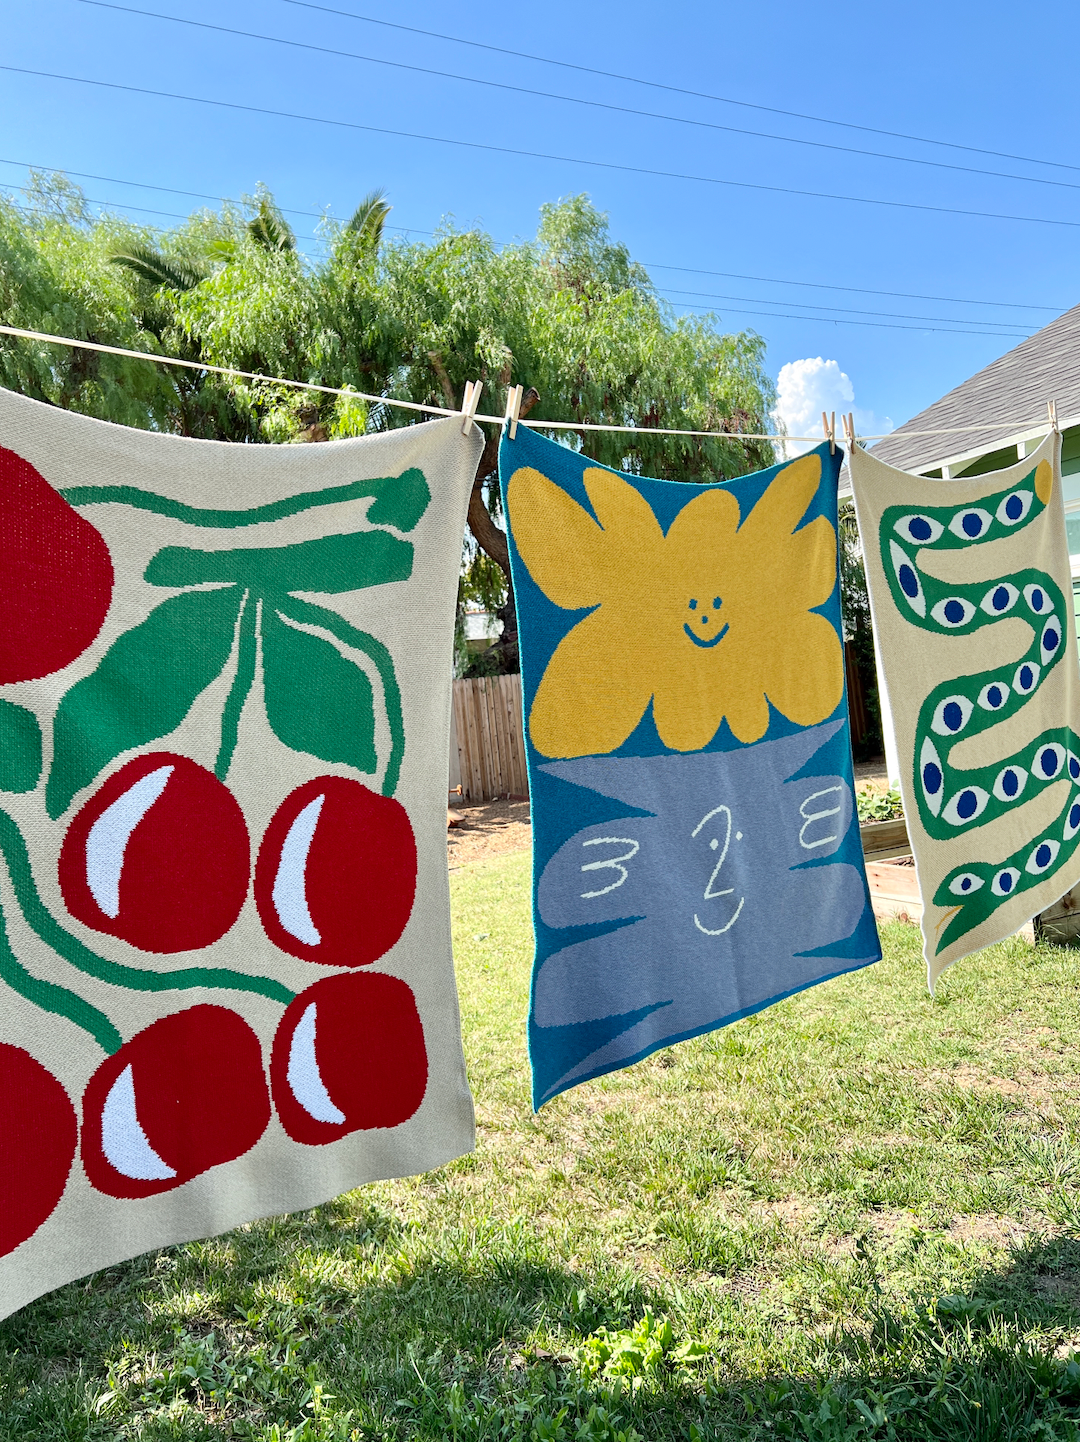 Three mini blankets on a washing line: one with red cherries and green leaves on a taupe background, one with yellow and grey smiley shapes on a sky blue background, one with a green snake with blue eyes on a taupe background